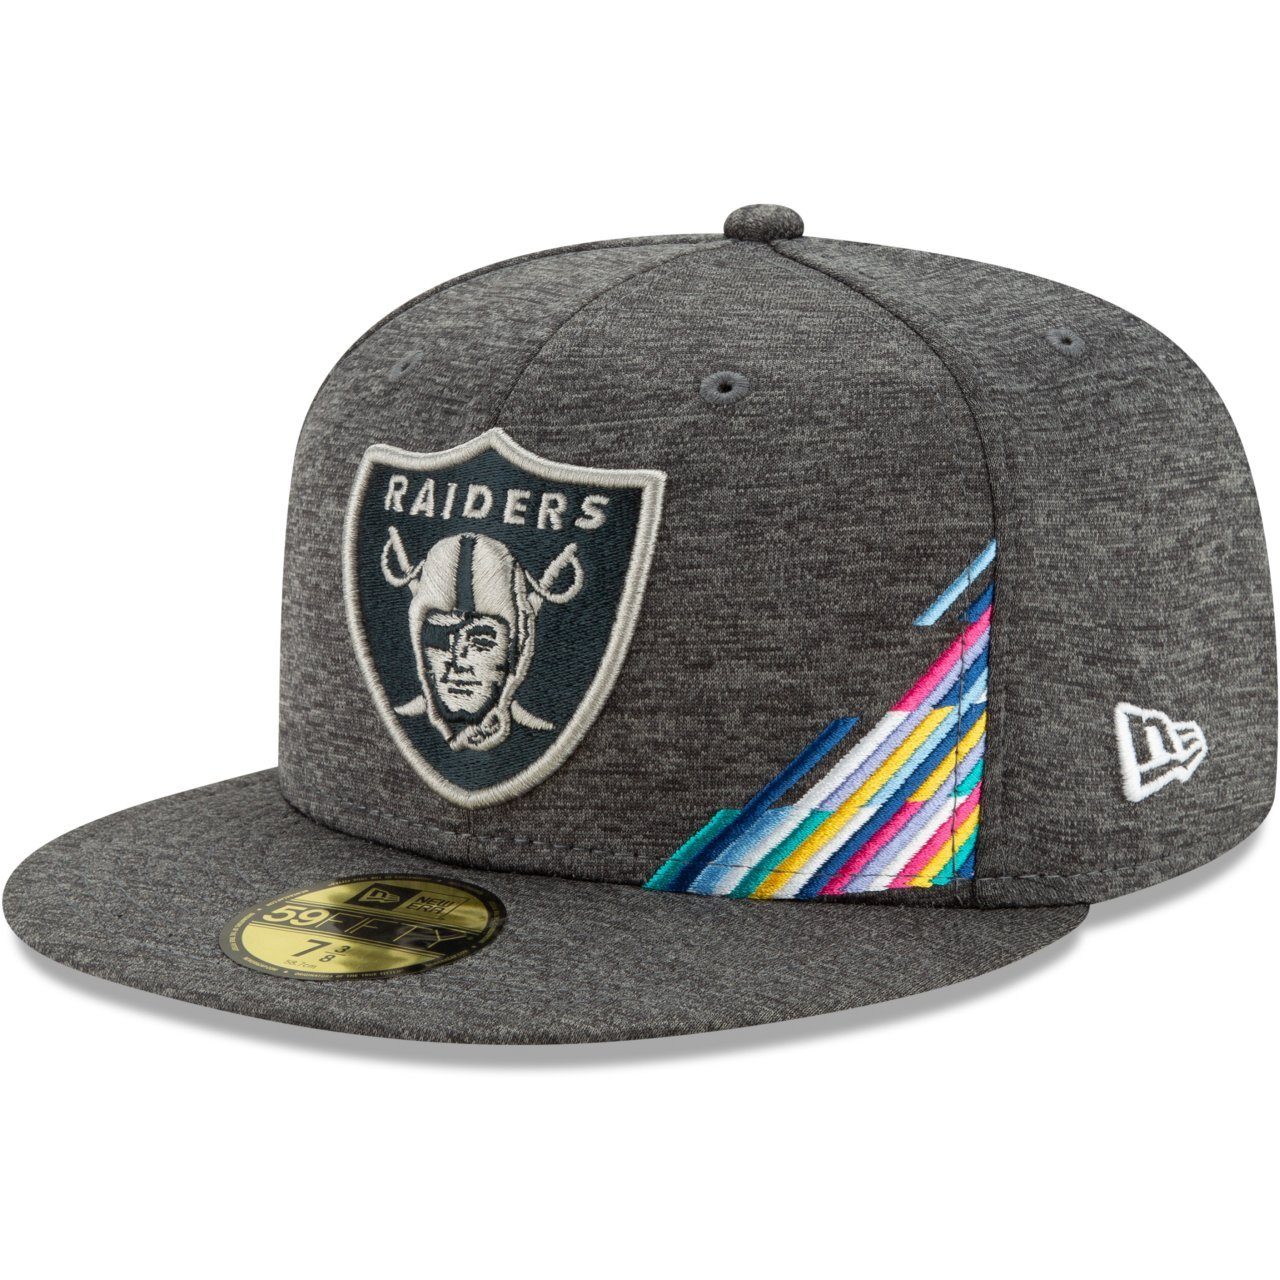 Raiders Fitted CRUCIAL 59Fifty Teams NFL Cap Oakland Era New CATCH